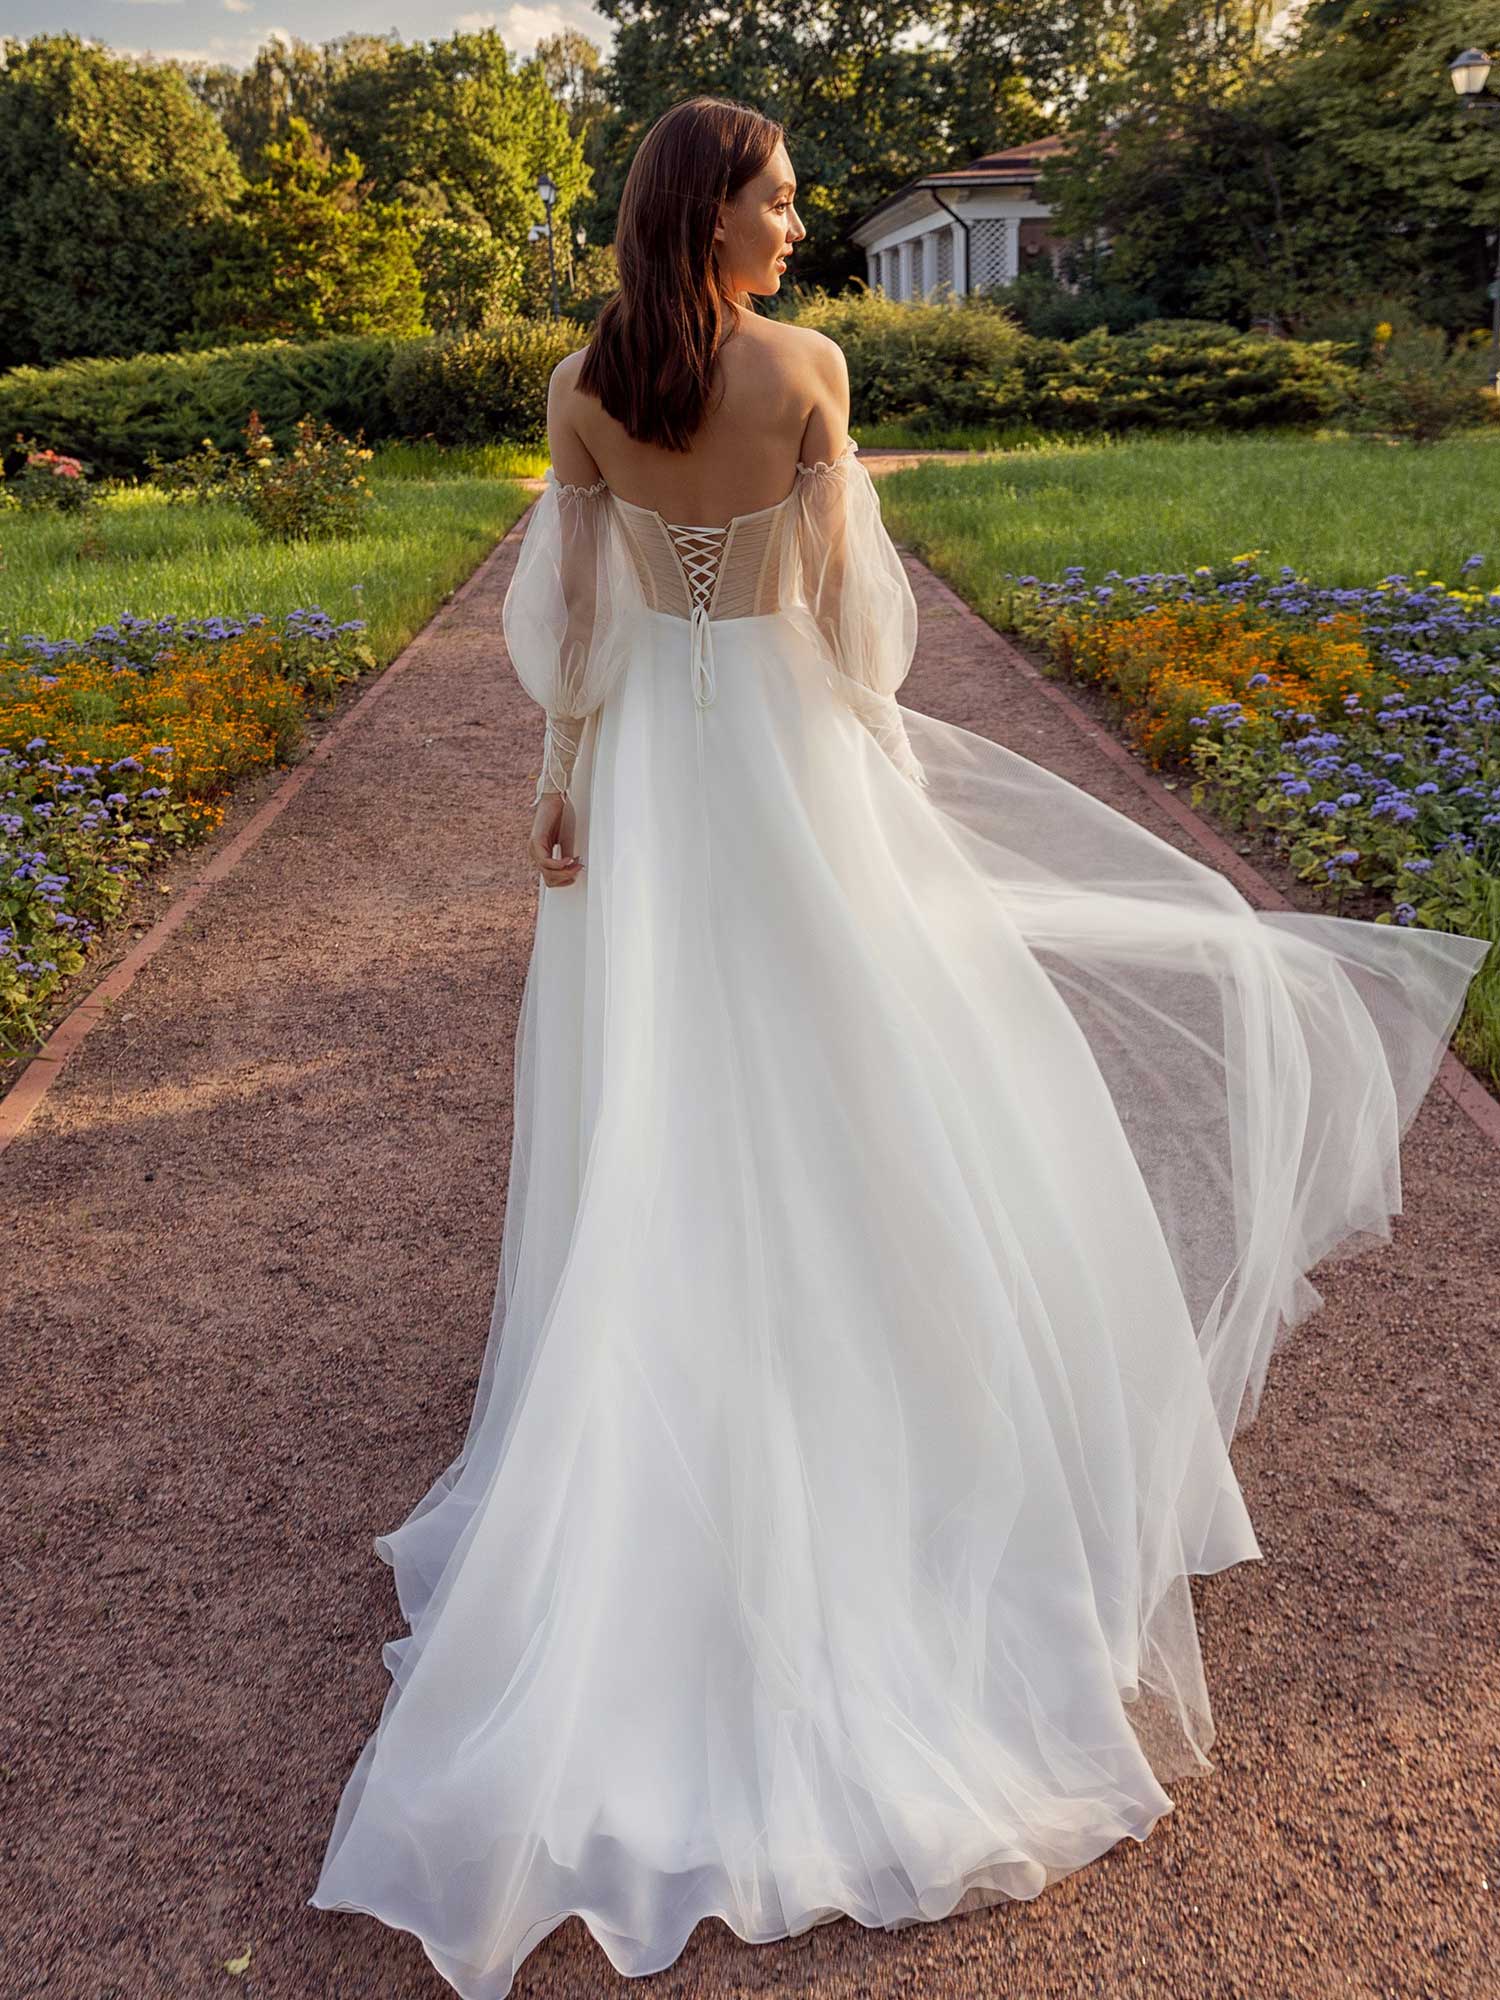 Strapless Aline wedding dress with removable sleeves